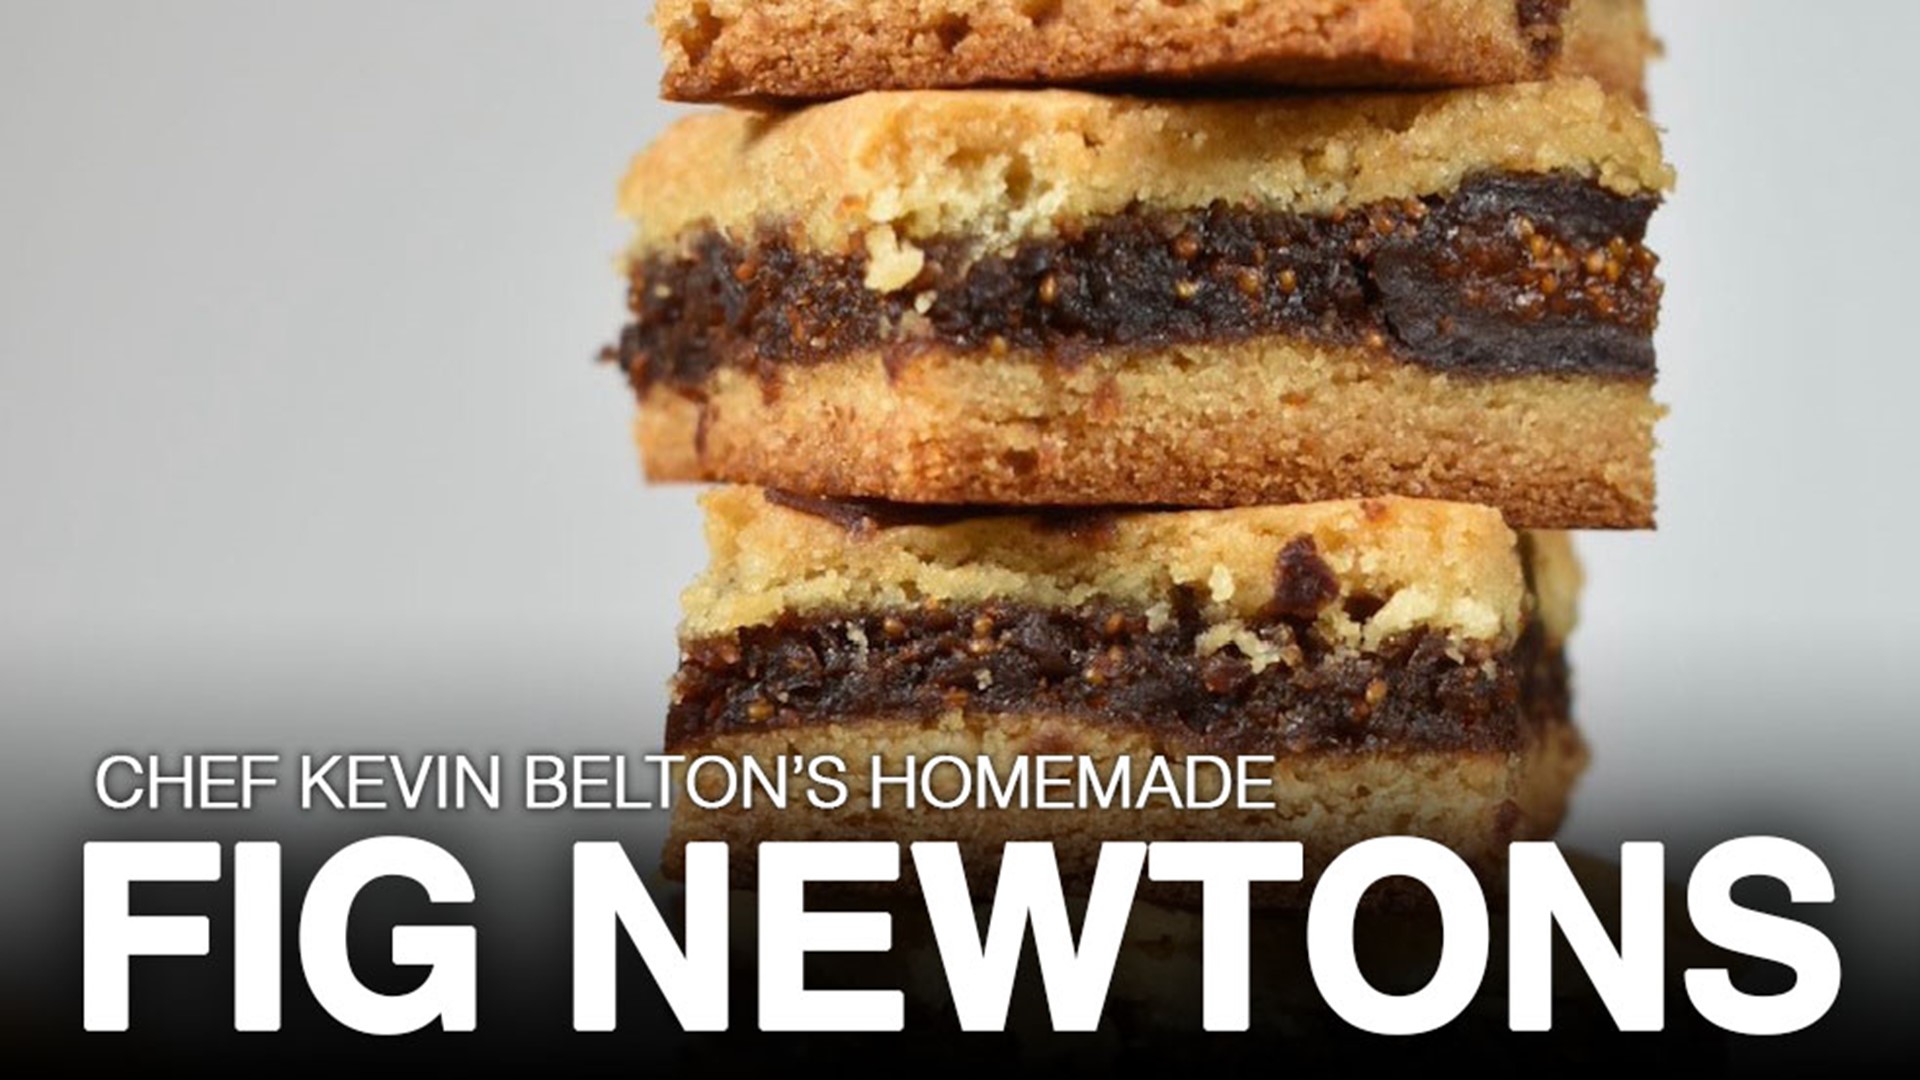 Tomorrow is National Fig Newton Day! We're celebrating one of my favorite cookies by making them at home.